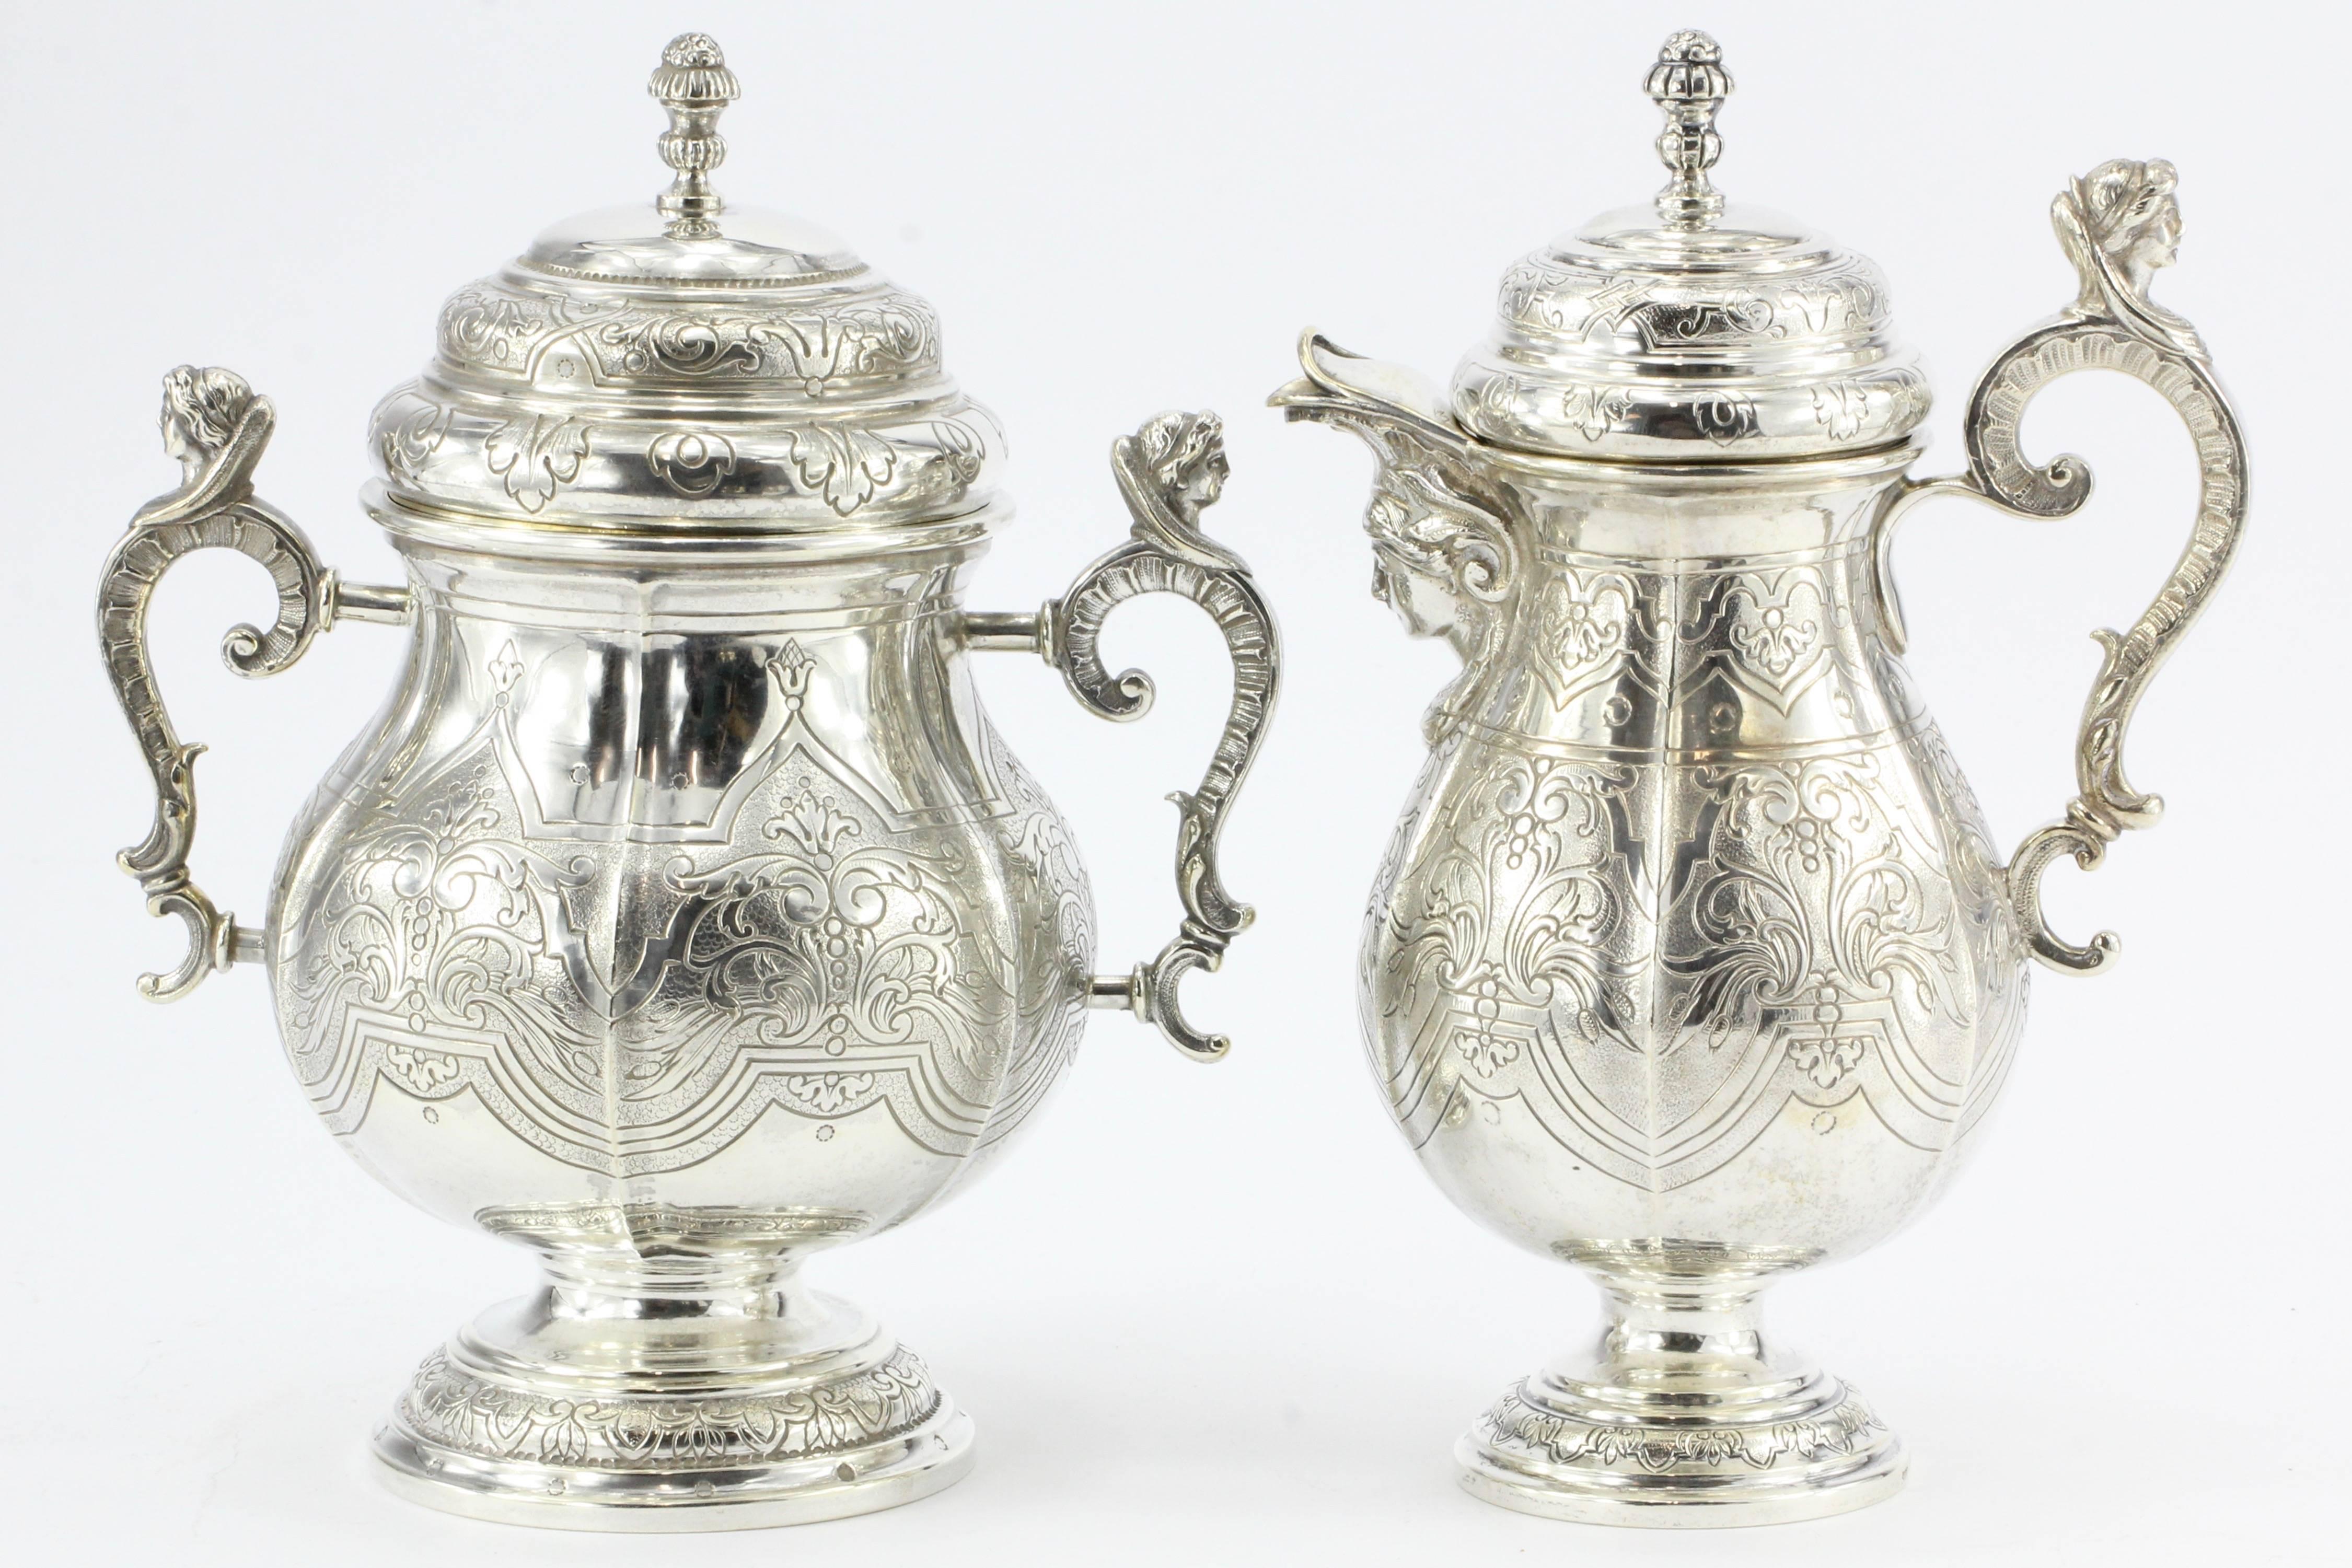 Antique Georg Roth Hanau Germany 800 silver figural revival five-piece tea set, circa 1890

The piece was made in Hanau Germany ins the late 19th century in the Renaissance Revival style. There is a large tea and coffee pot as well as a covered